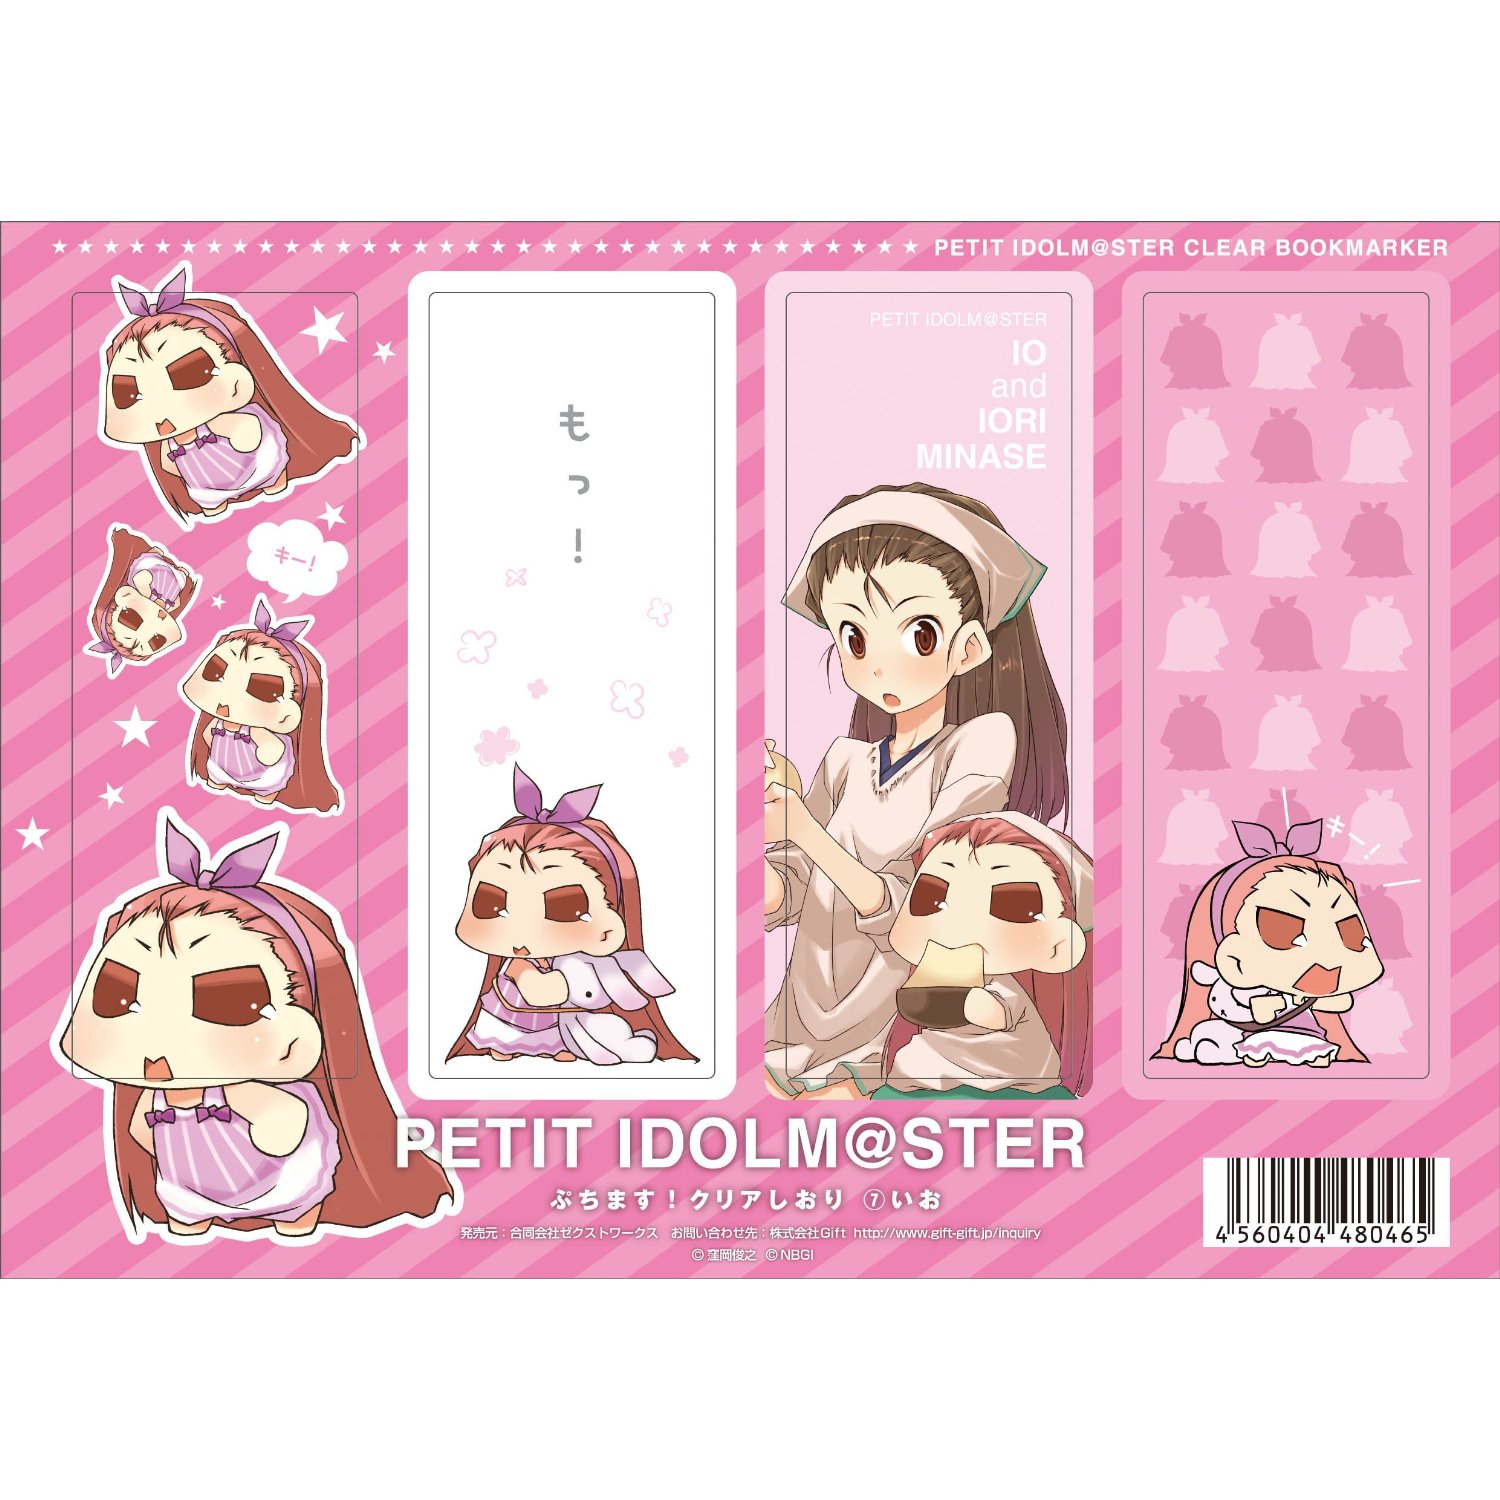 Petit IdolM@ster Clear Bookmarker: #7 Io